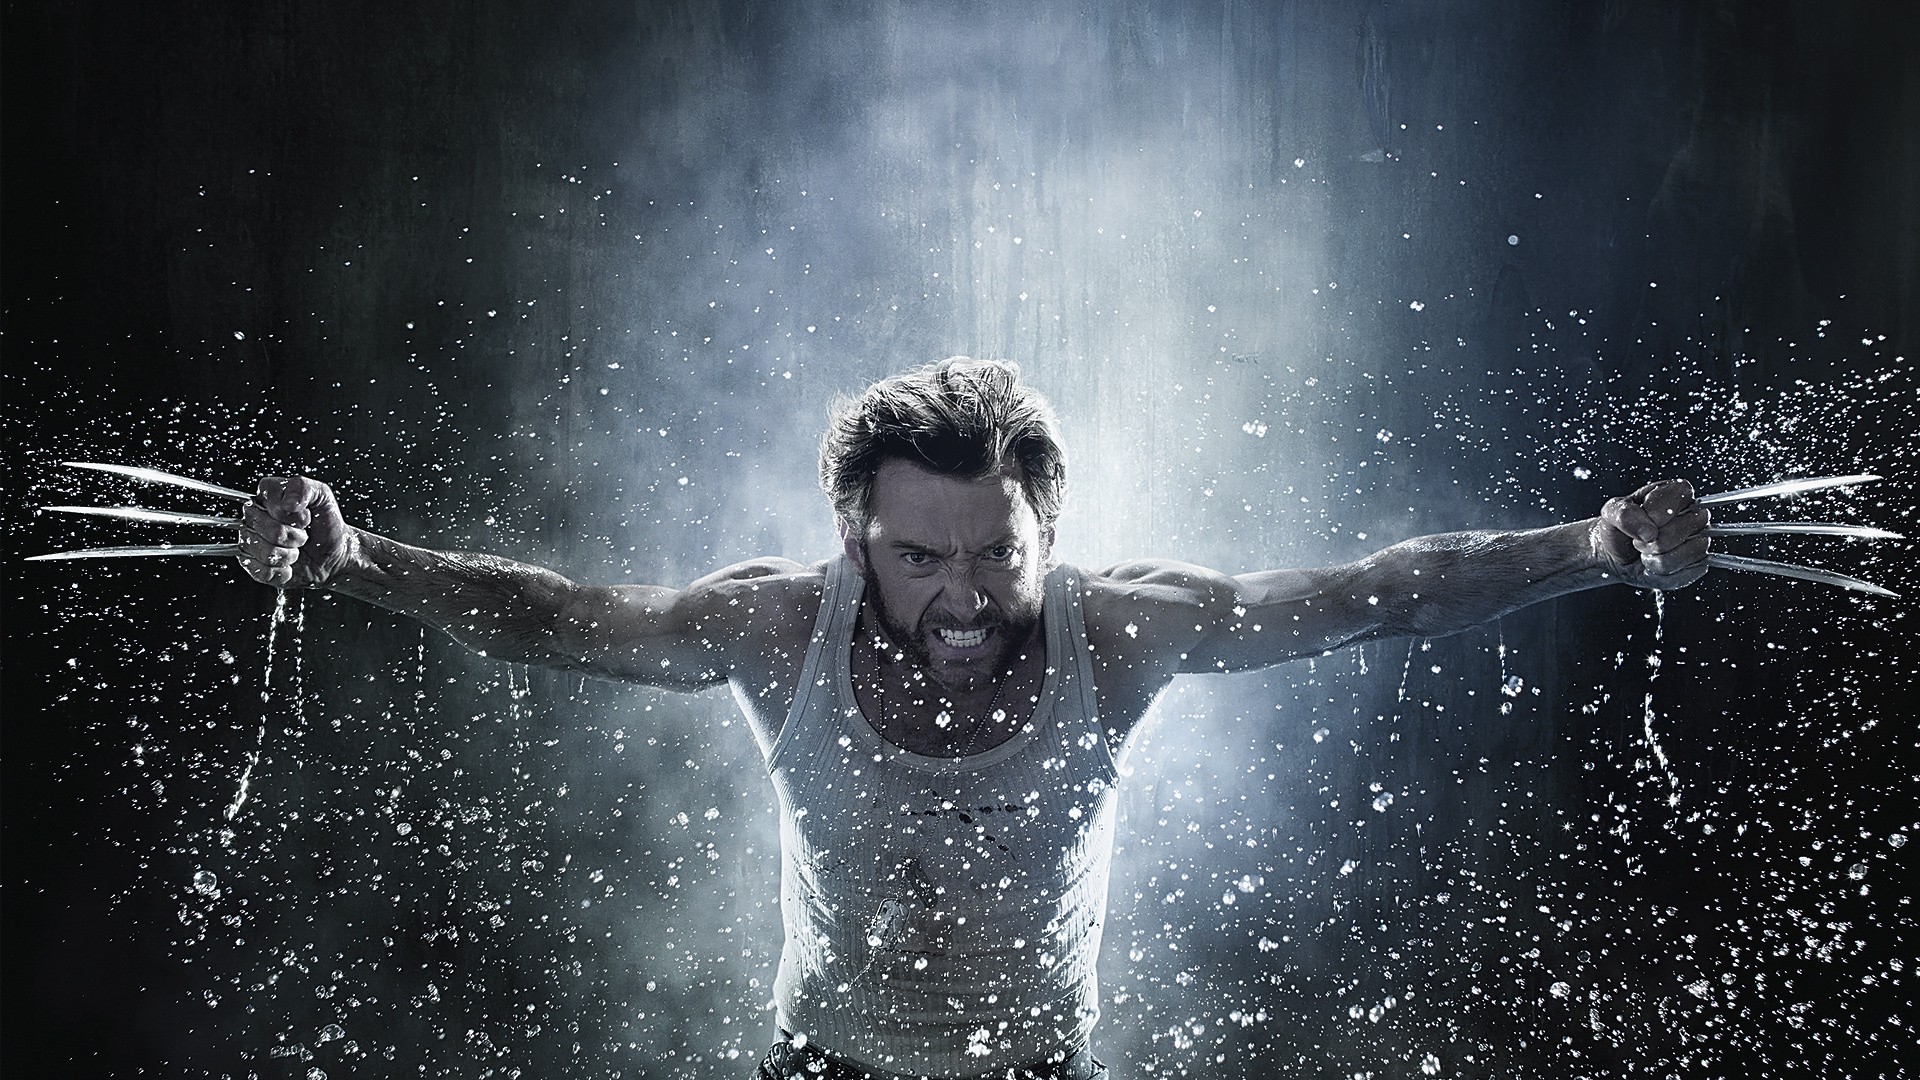 HD 4K lucky-mangione-as-wolverine Wallpapers for Mobile